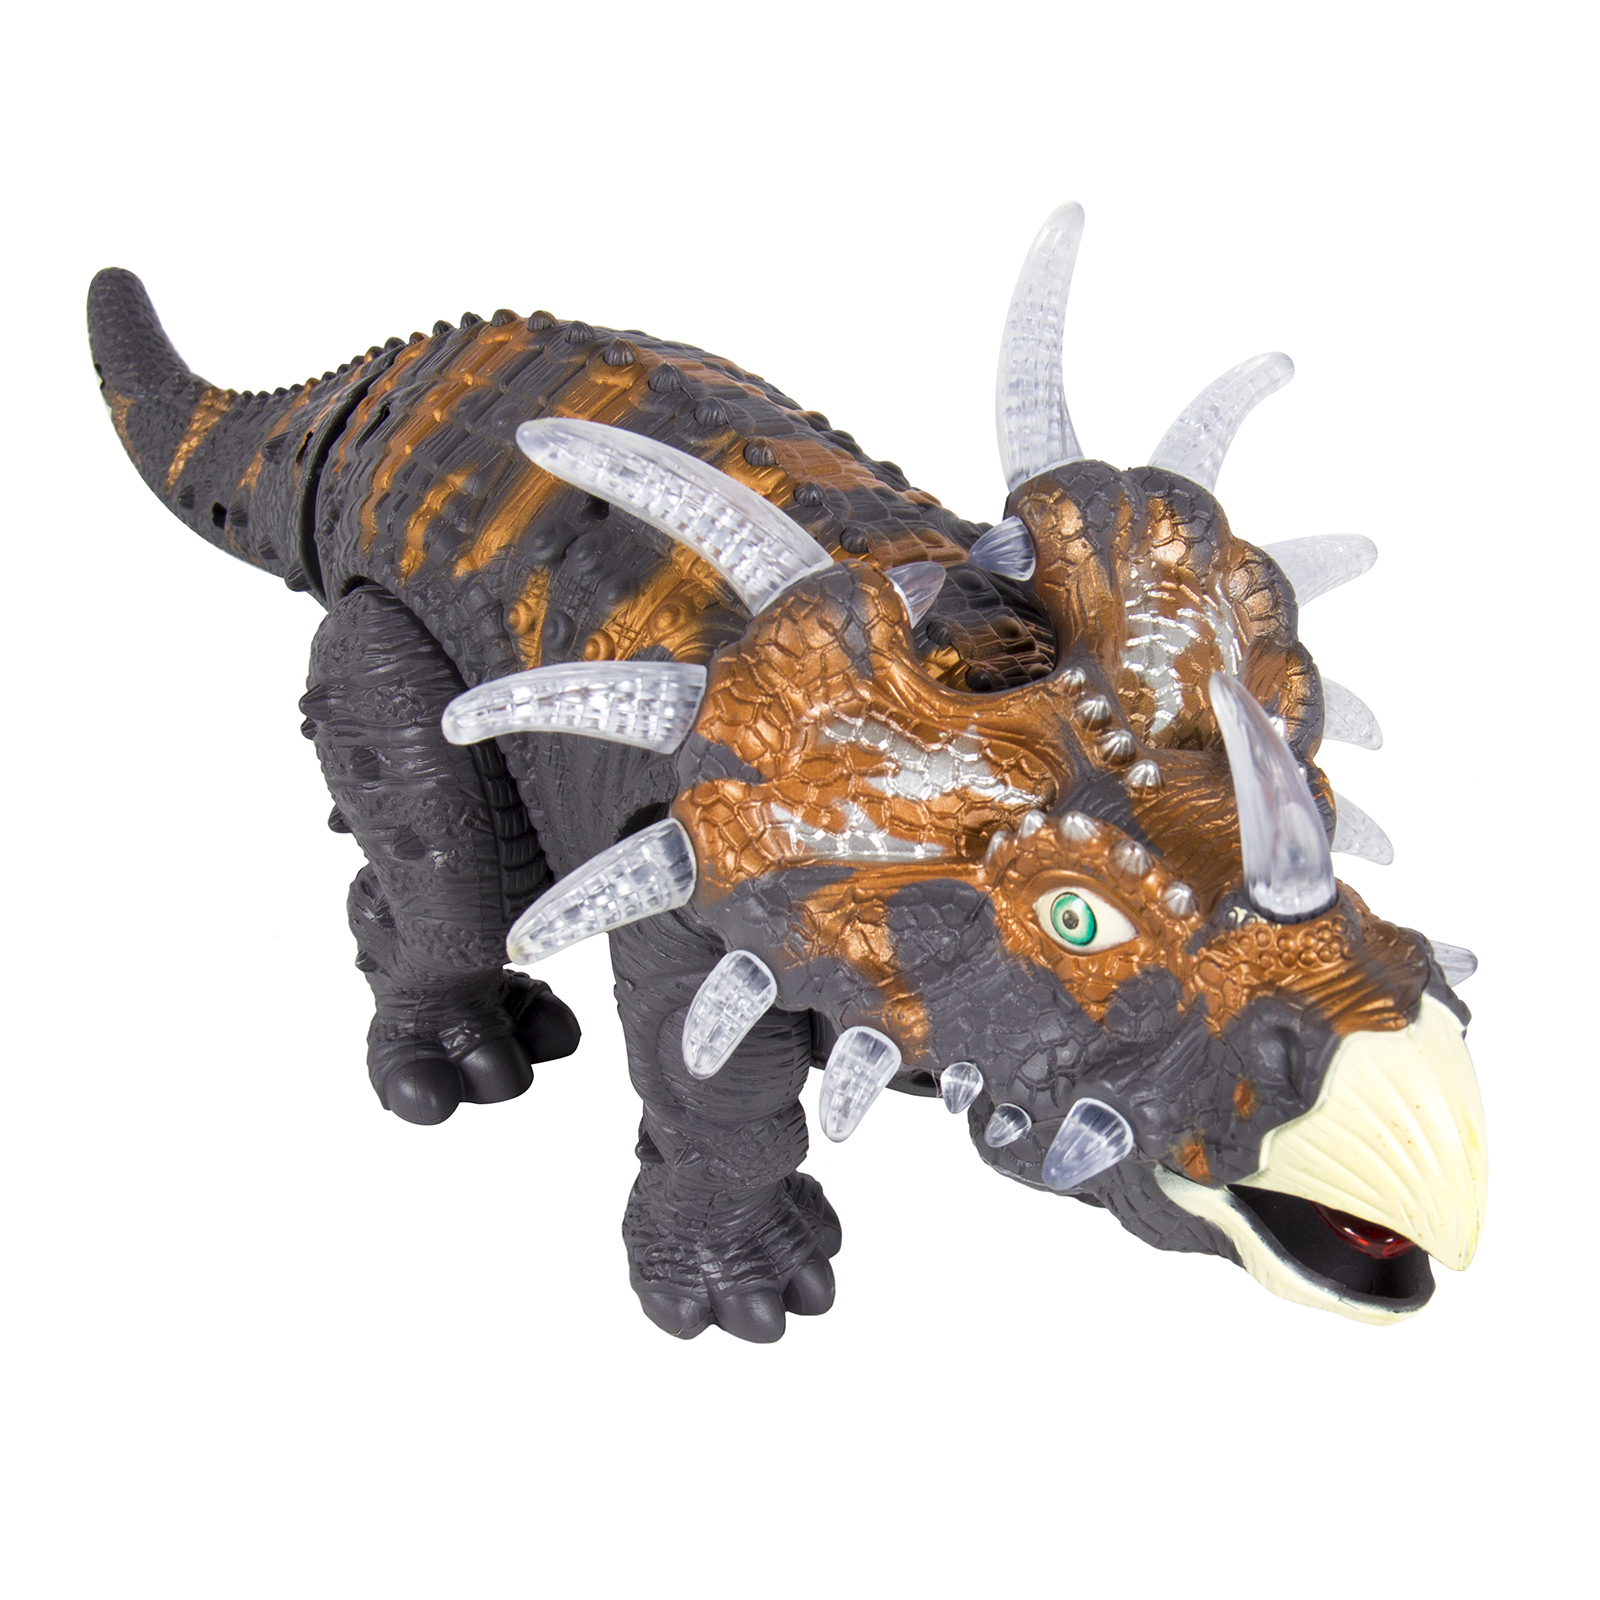 Best Choice Products 14in Kids RC Interactive Walking Triceratops Dinosaur Animal Toy Figure w/ Lights, Sound - image 2 of 7